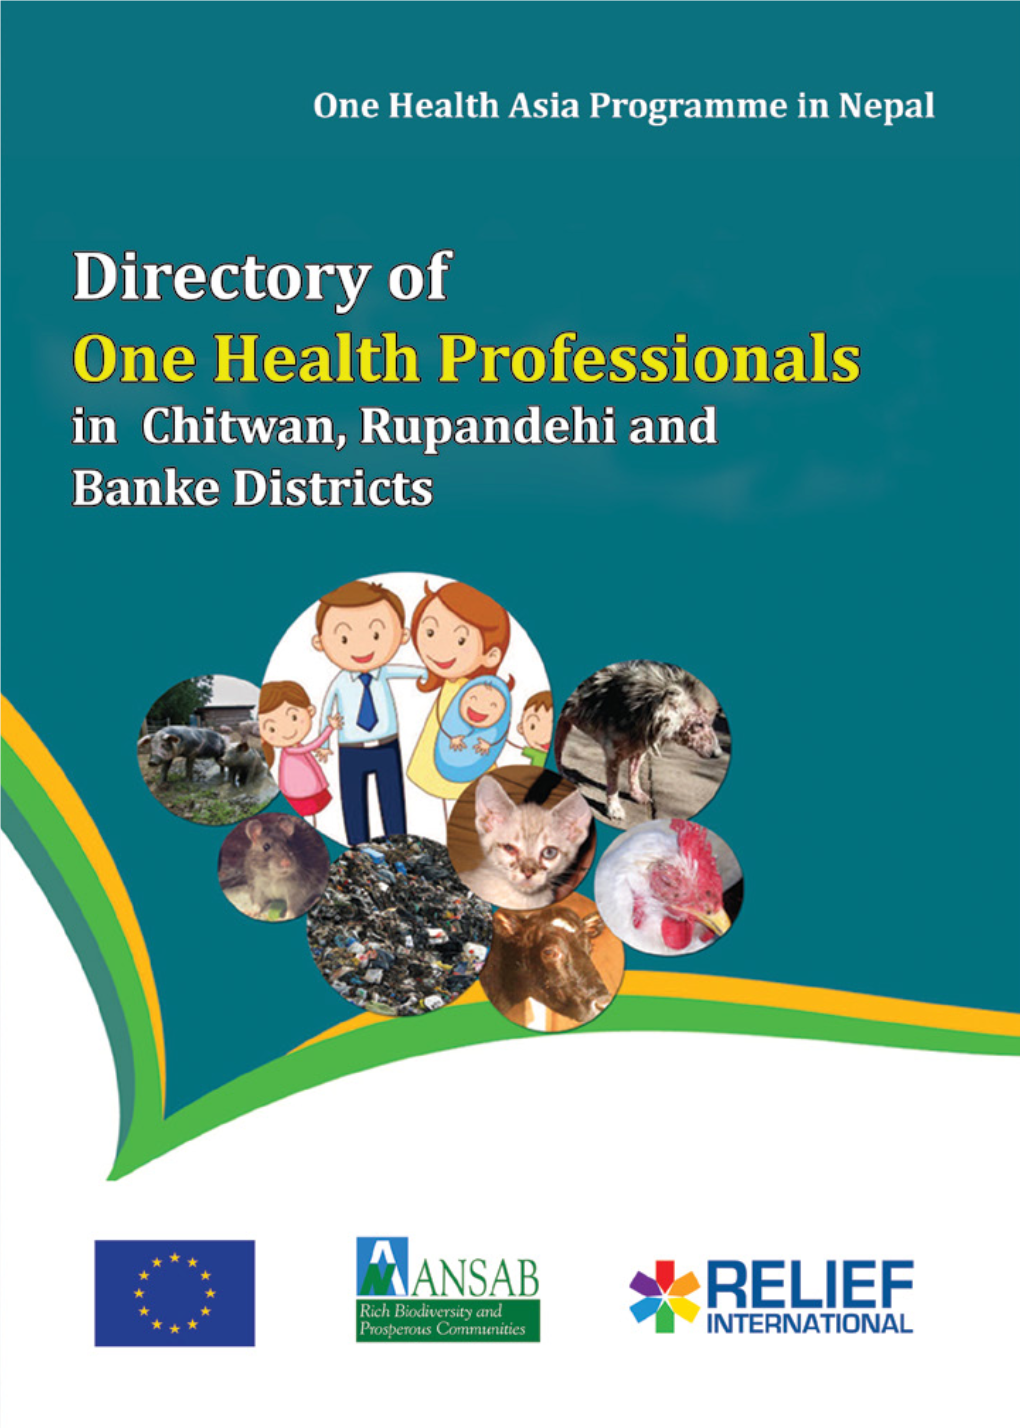 Directory of One Health Professionals in Chitwan, Rupandehi and Banke Districts